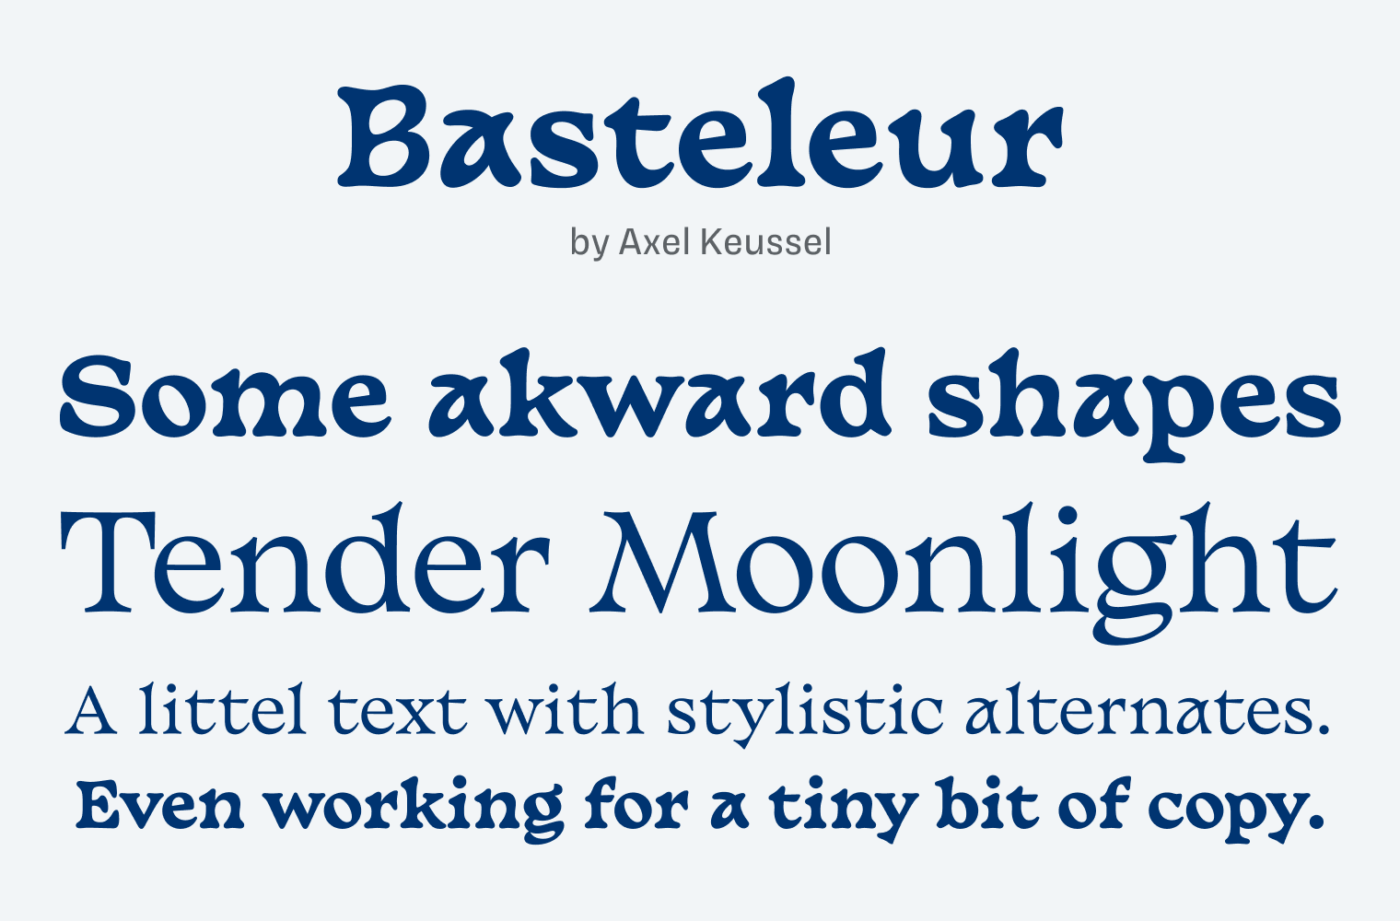 Basteleur by Axel Keussel. Some akward shapes Tender Moonlight
A littel text with stylistic alternates.
Even working for a tiny bit of copy.